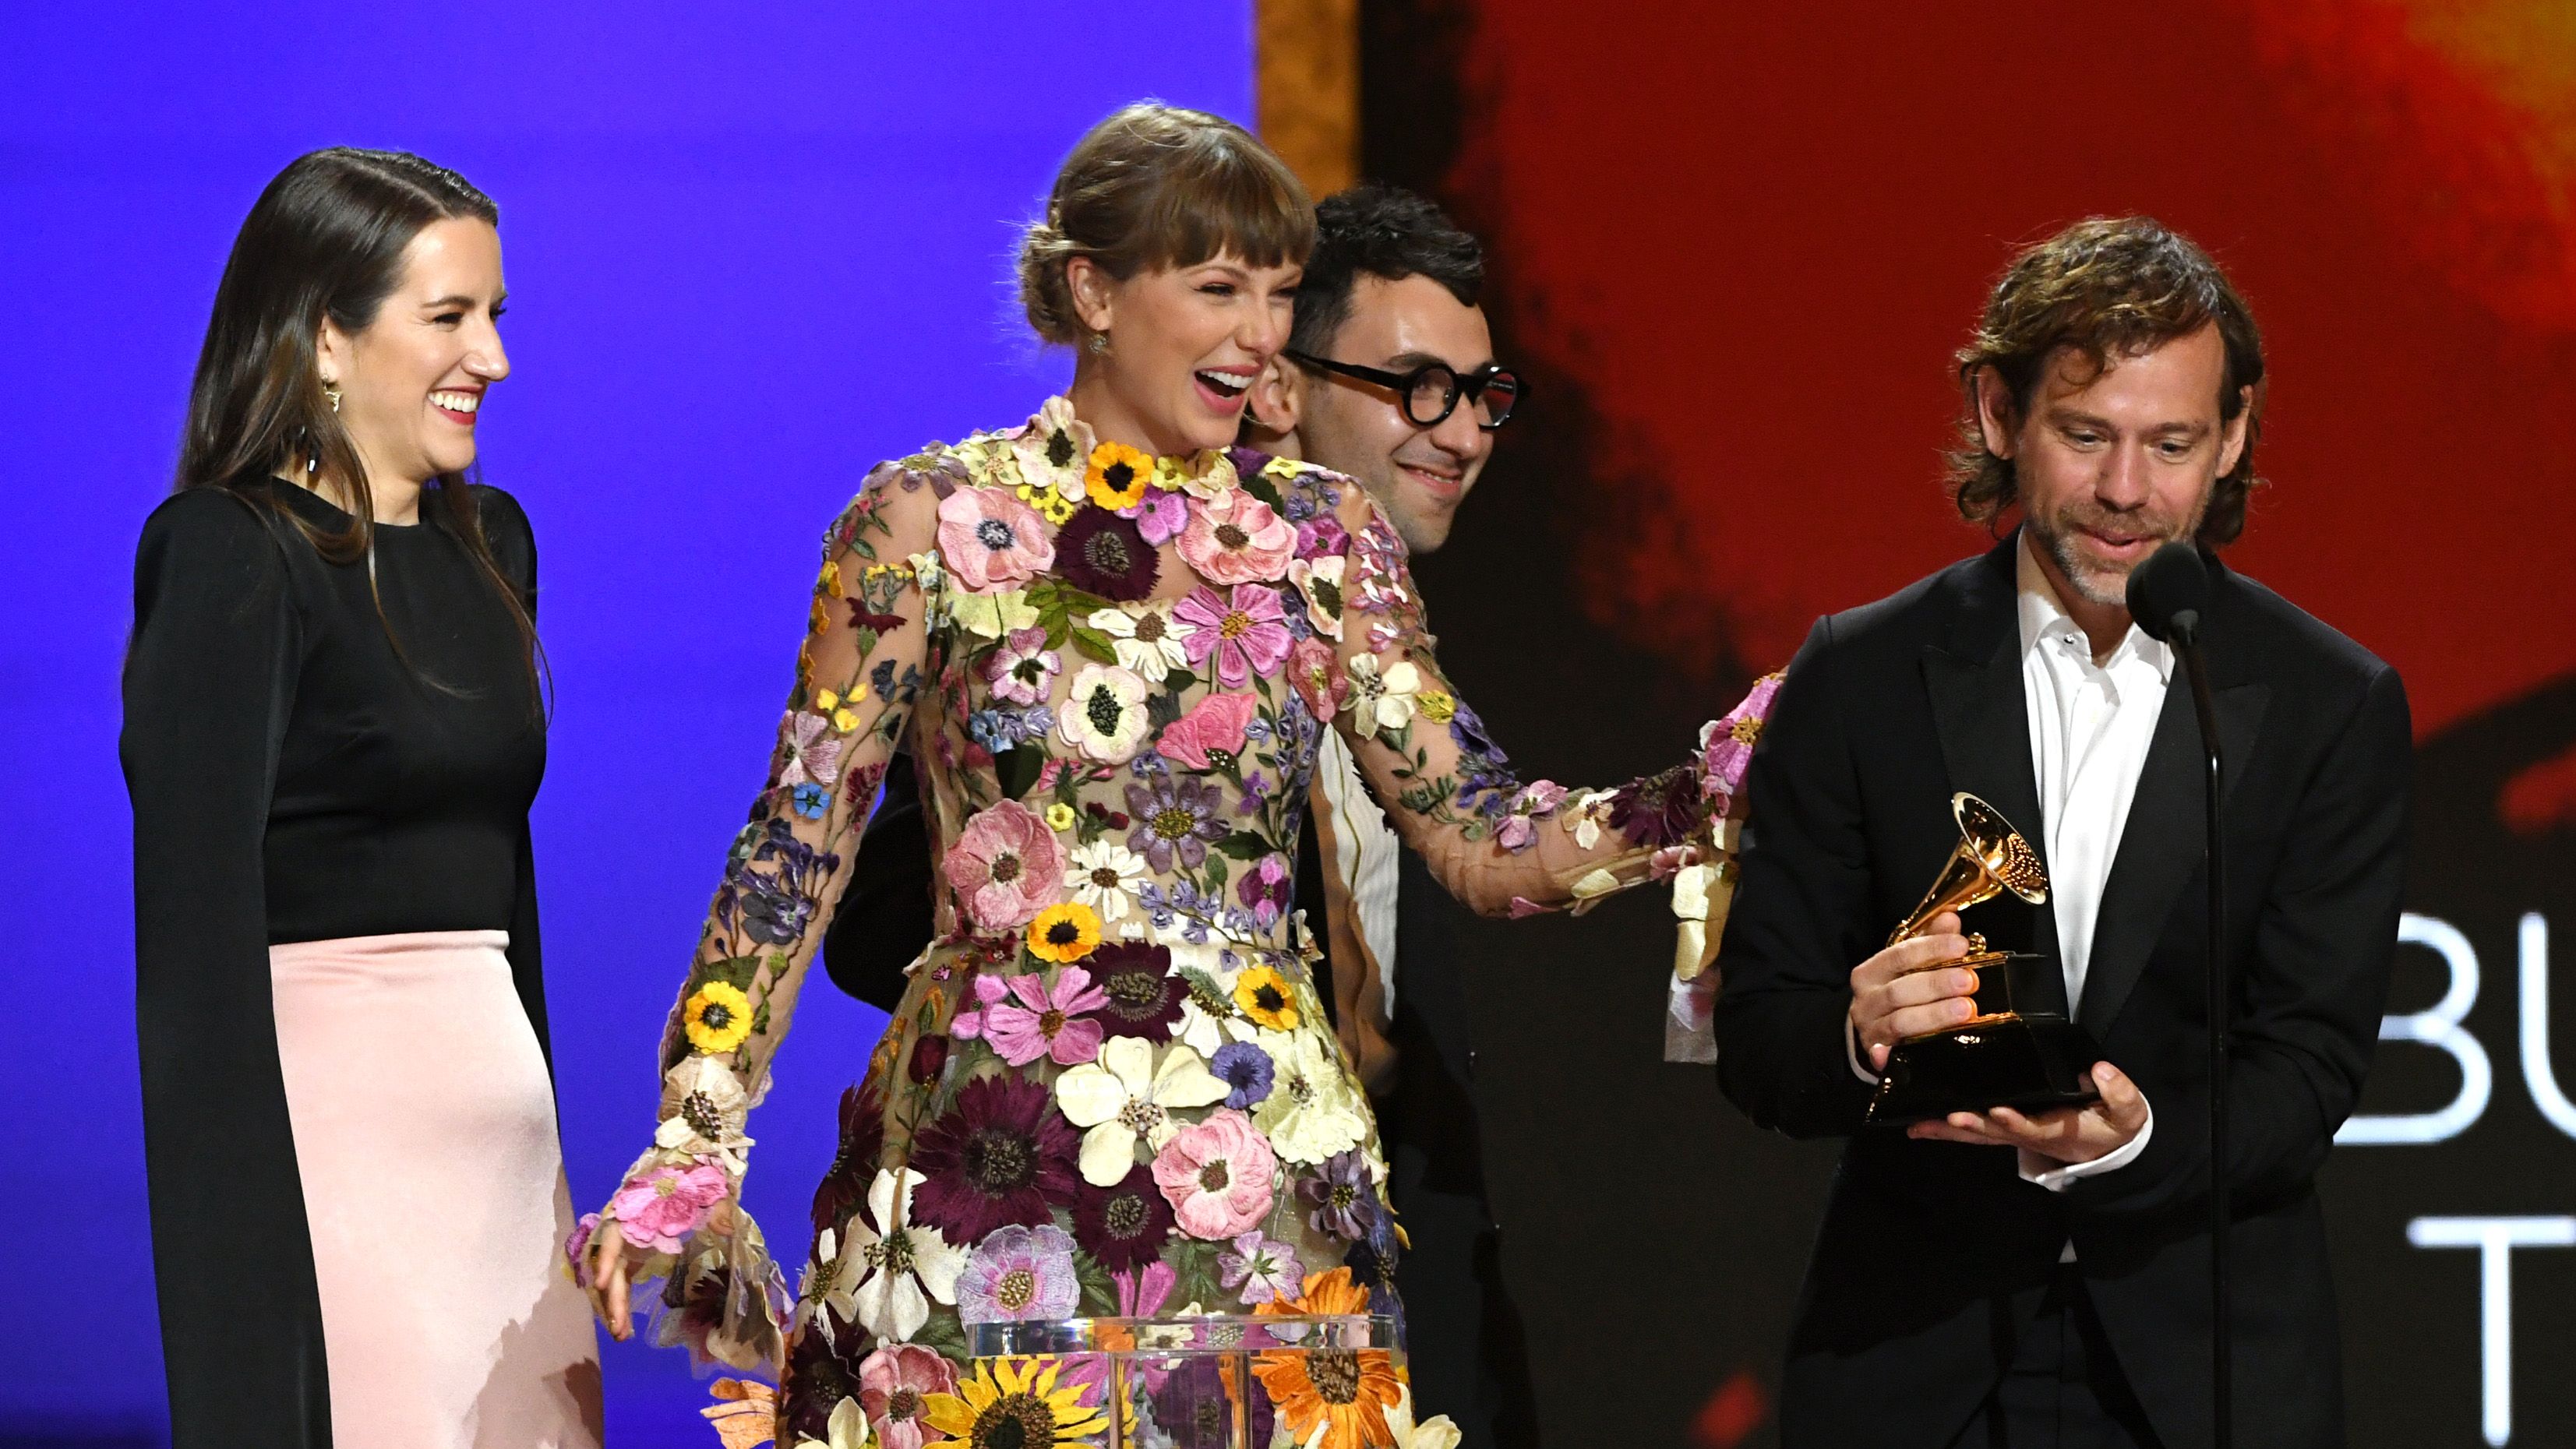 https://hips.hearstapps.com/hmg-prod/images/laura-sisk-taylor-swift-jack-antonoff-and-aaron-dessner-news-photo-1615778394.?crop=1xw:0.84375xh;center,top